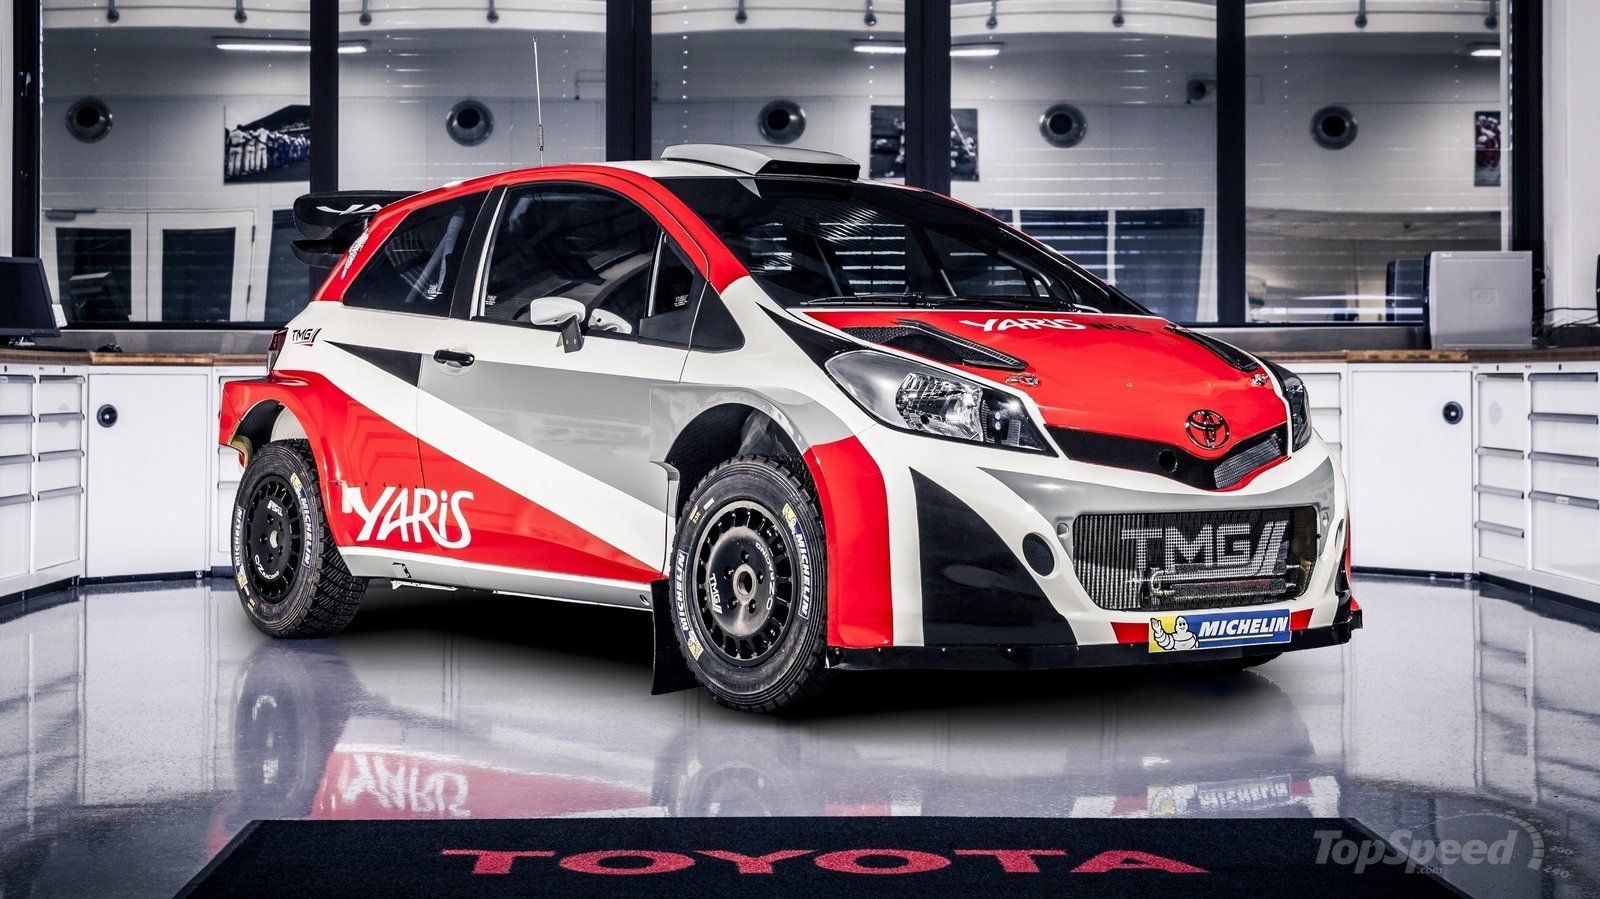 Toyota Yaris WRC Picture, Photo, Wallpaper And Videos